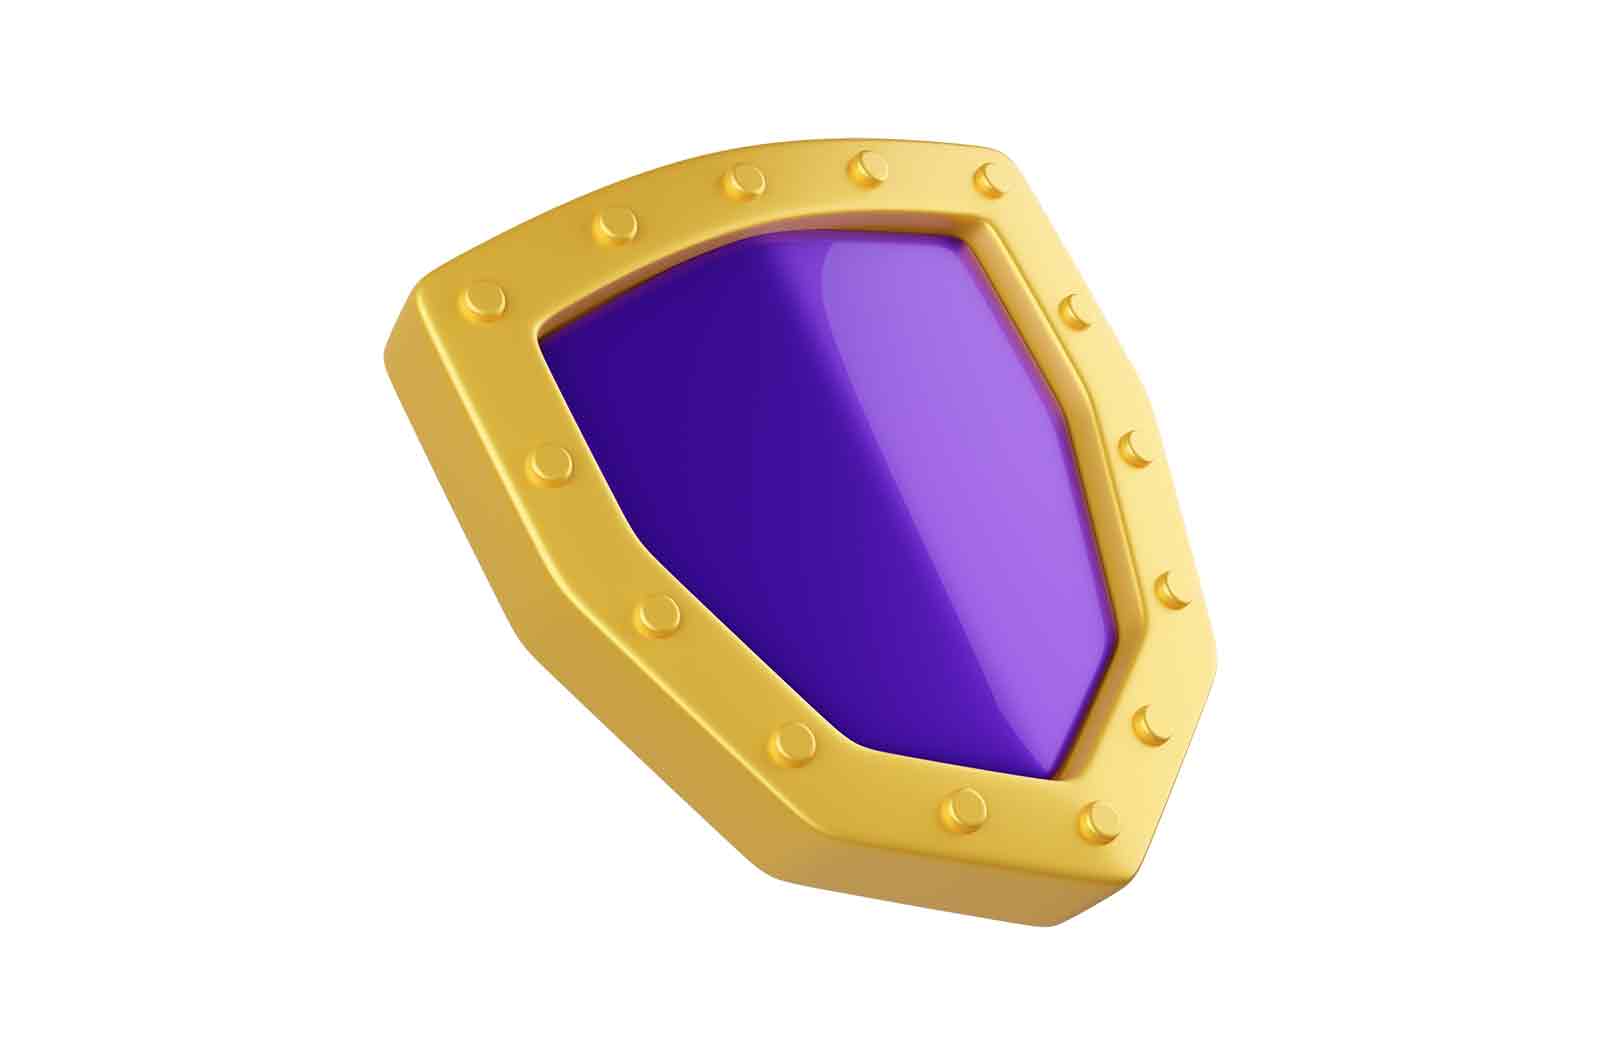 Gold shield with purple center, 3d rendered illustration. Symbol of protection, security, or nobility.